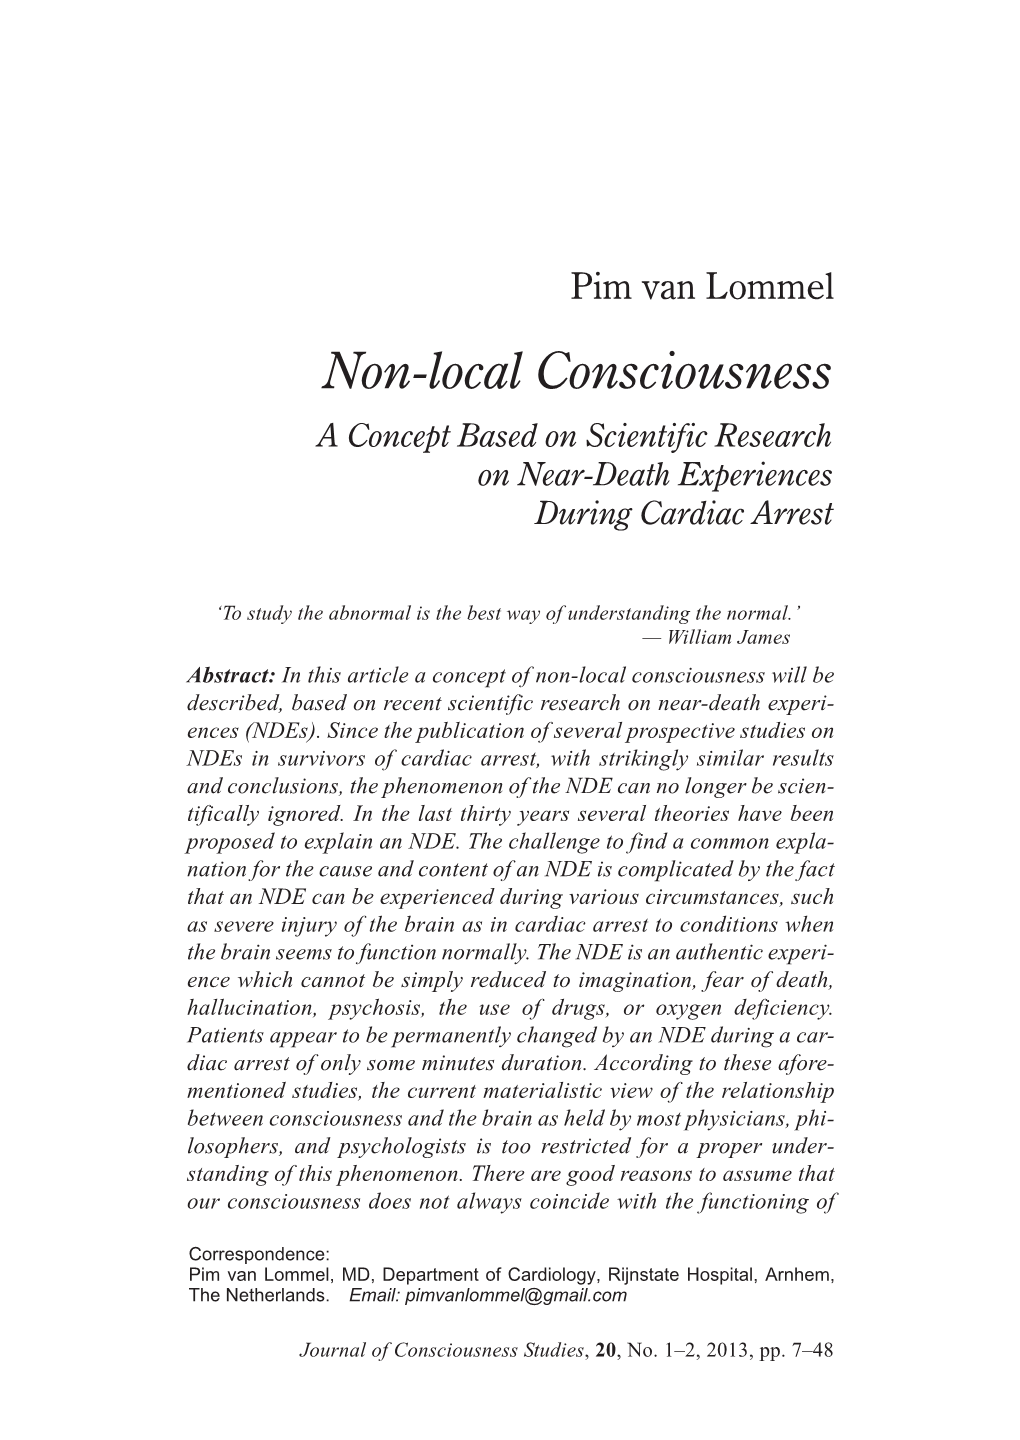 Non-Local Consciousness a Concept Based on Scientific Research on Near-Death Experiences During Cardiac Arrest